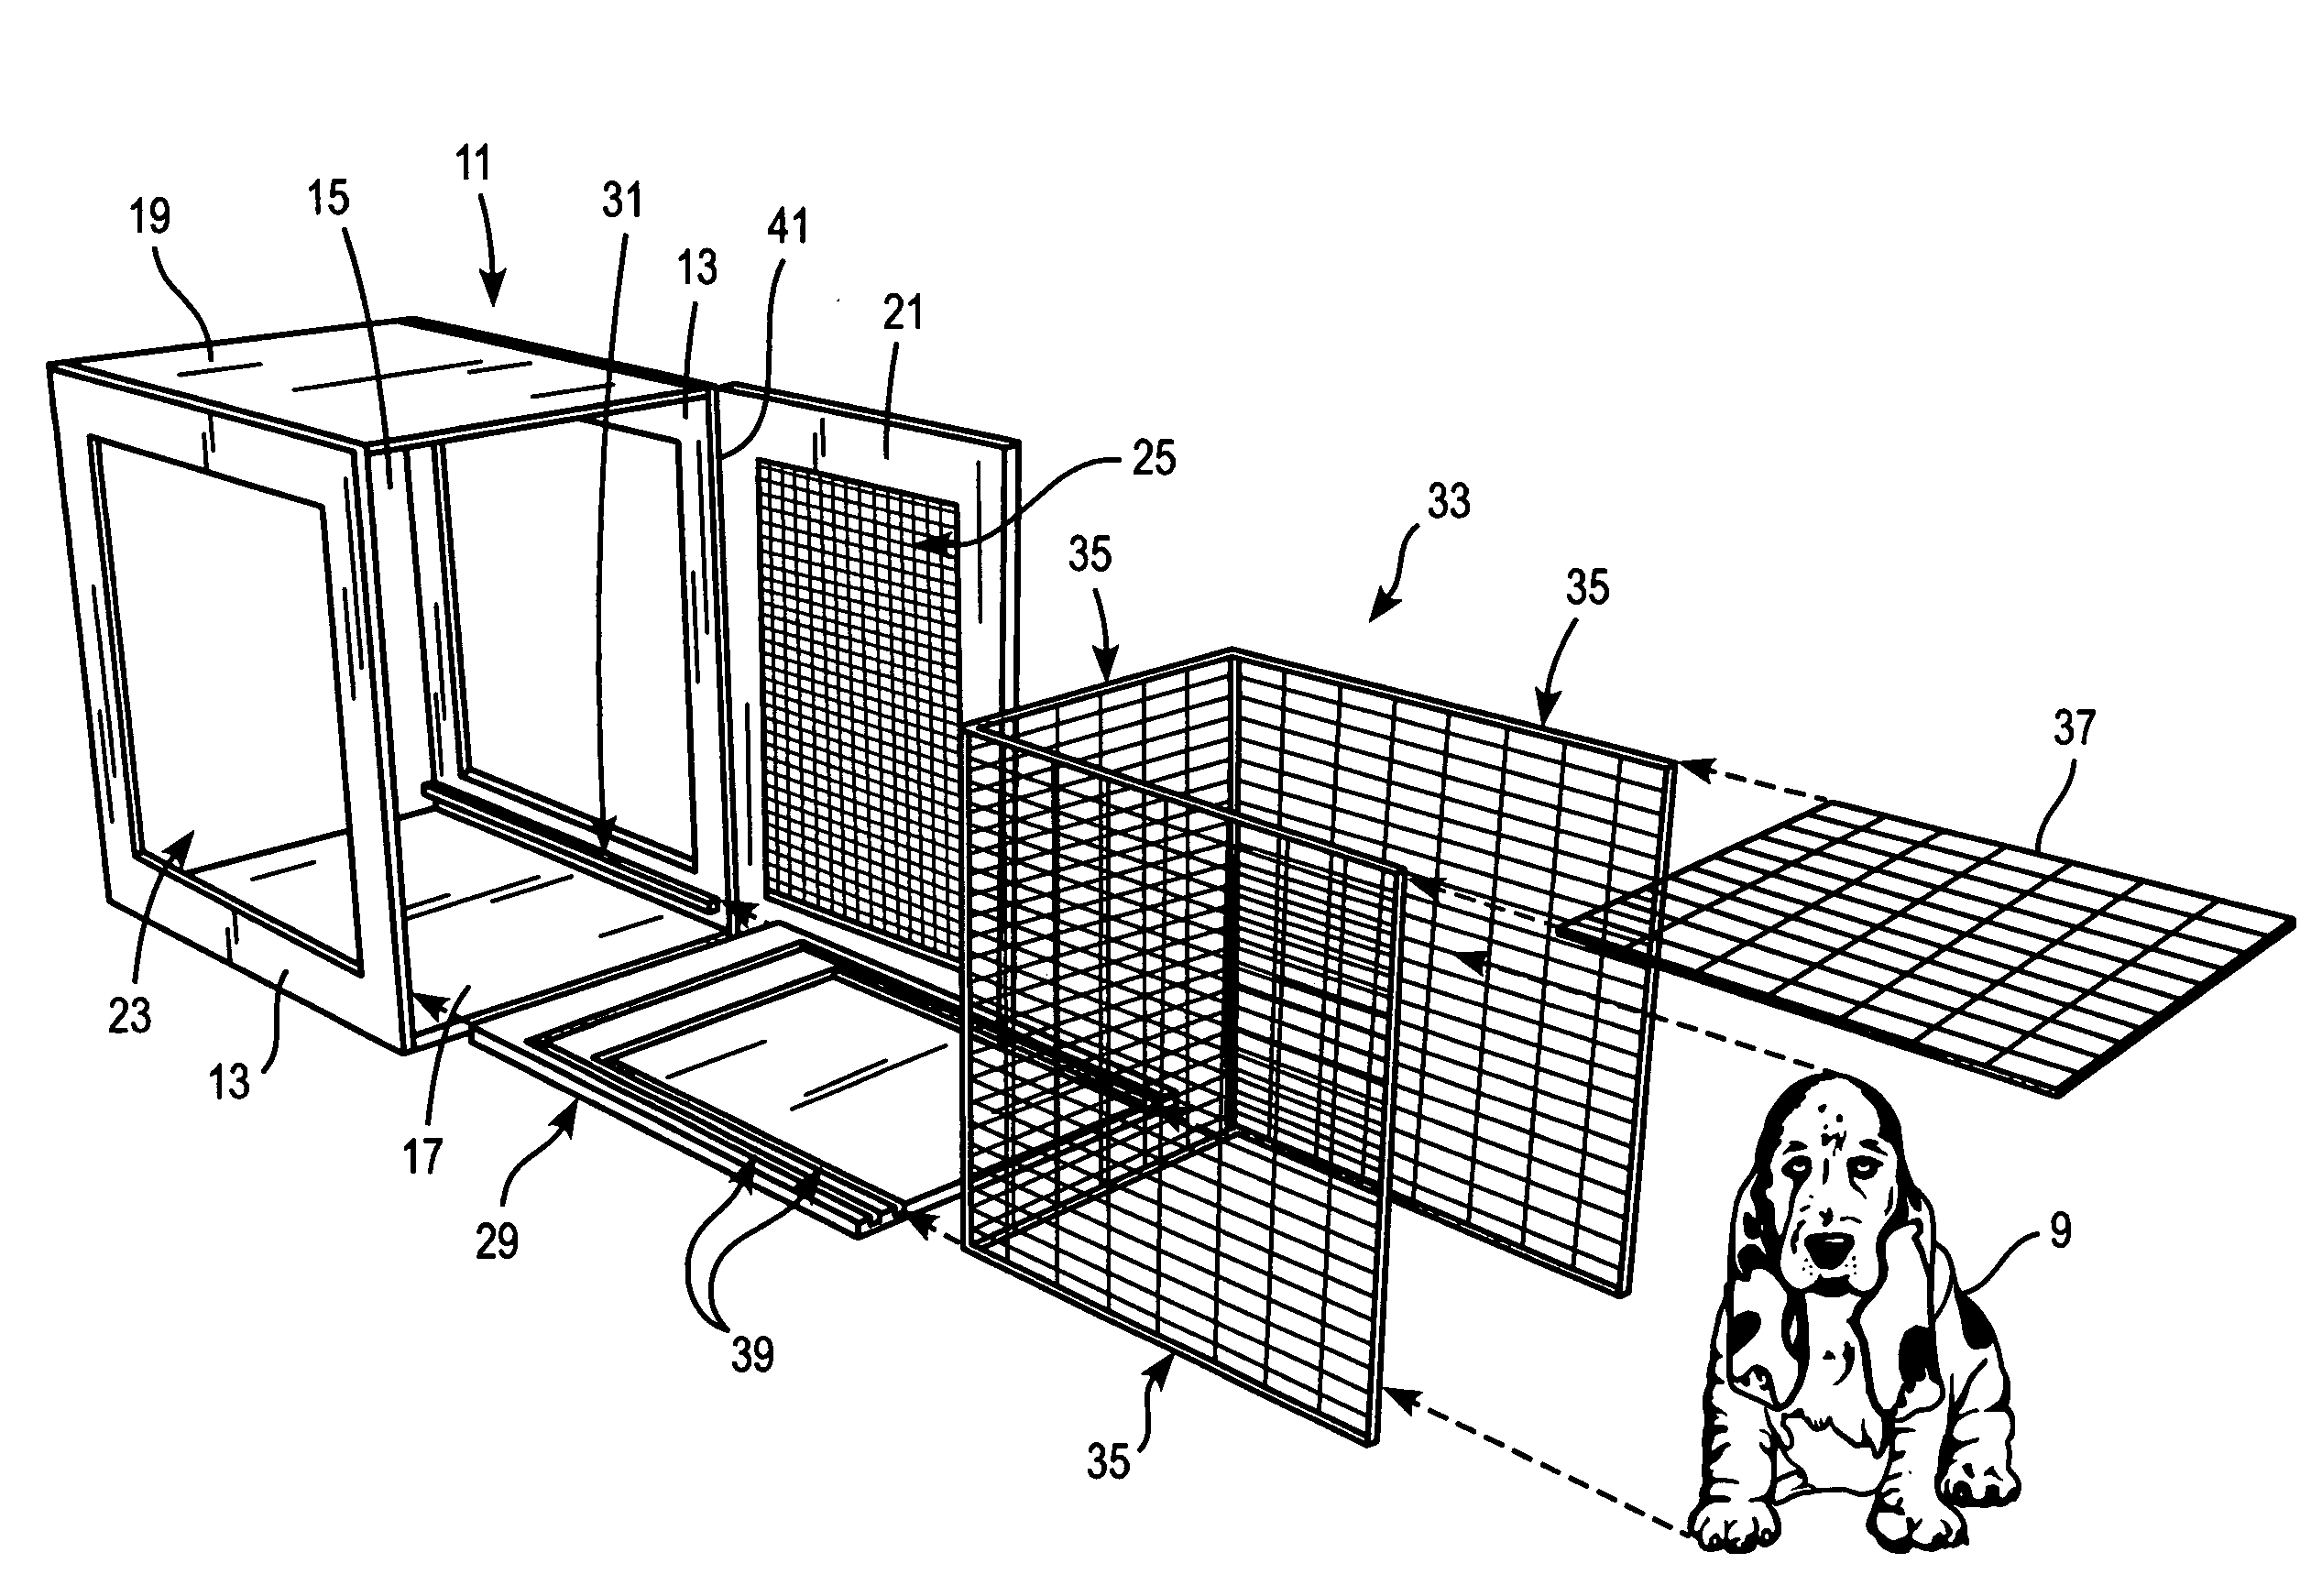 Combined furniture and animal housing